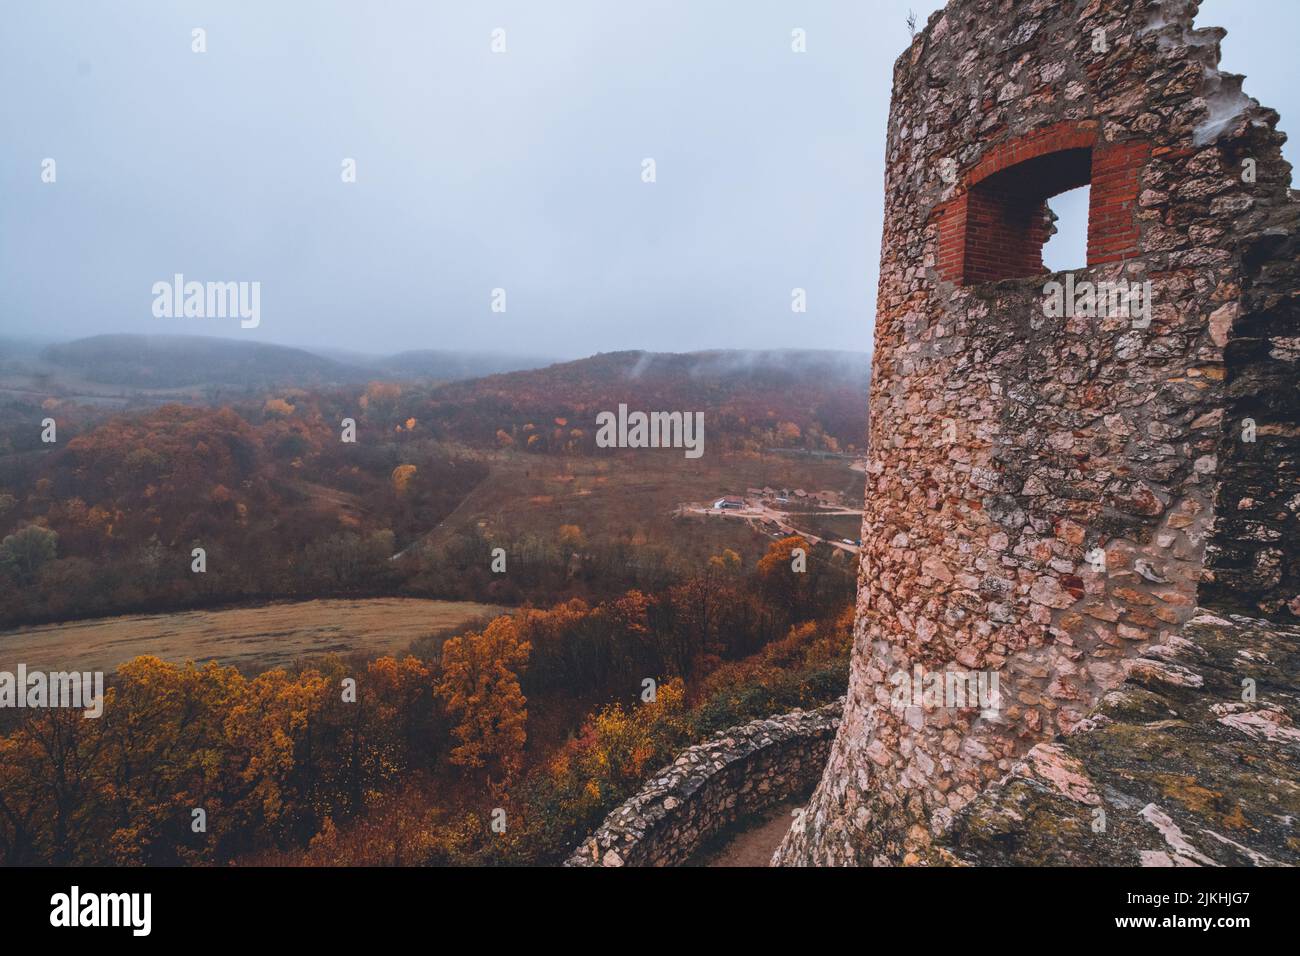 A beautiful shot of the Csesznek Castle Ruins in Hungary on a foggy day Stock Photo